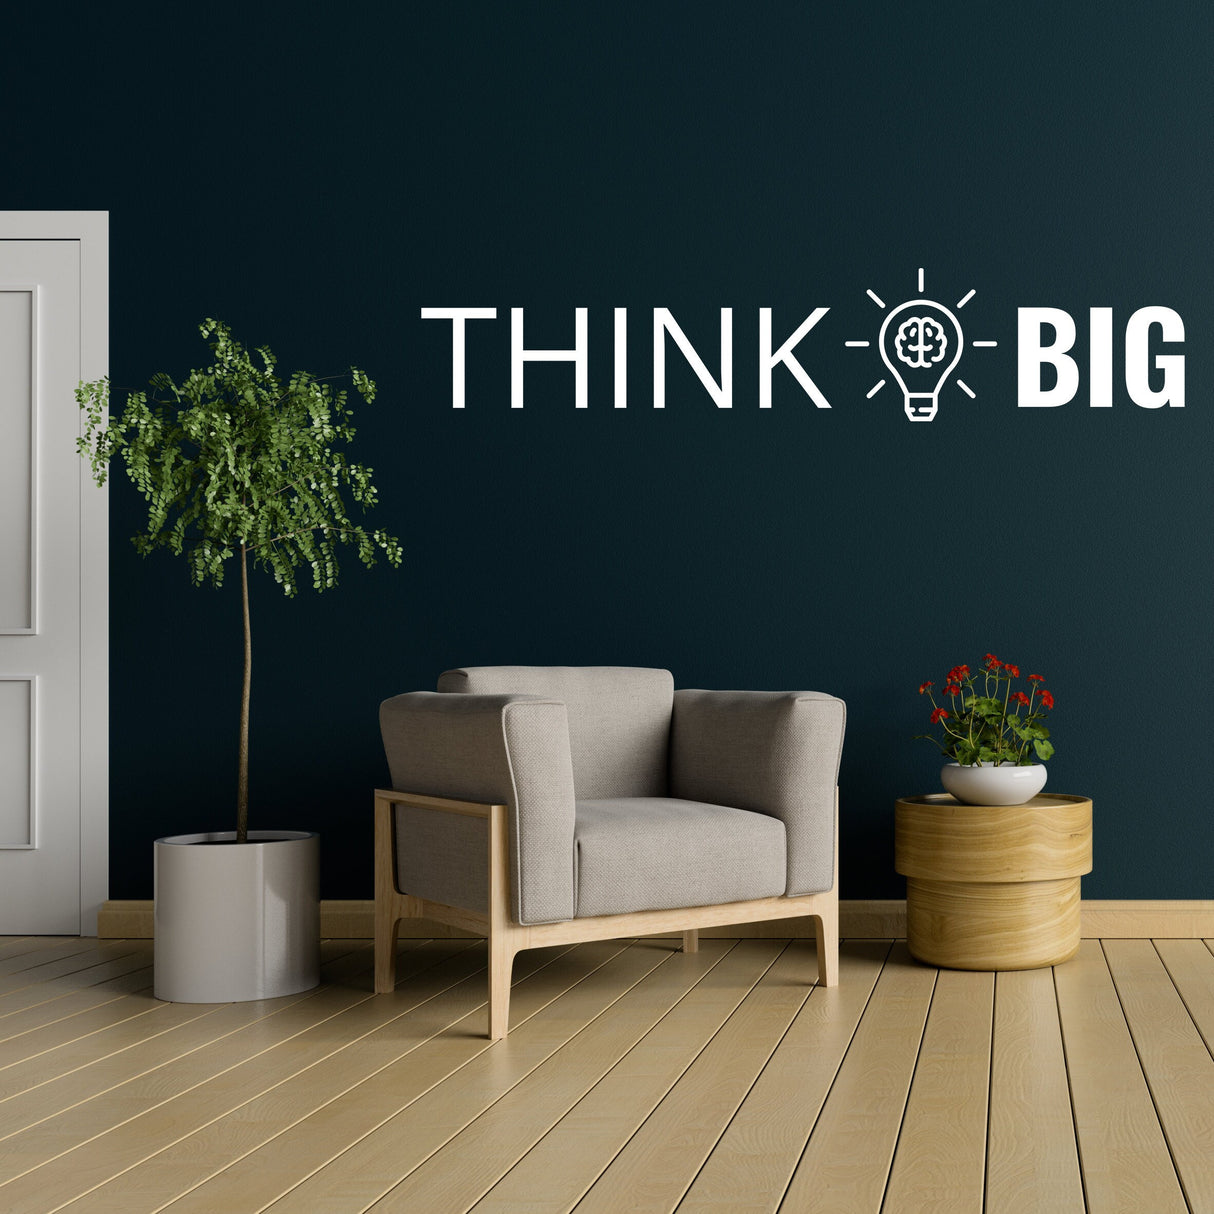 Thing Big Wall Art Sticker for Office Success - Thinking Smart Inspirational & Motivational Conference Room Decor Decal